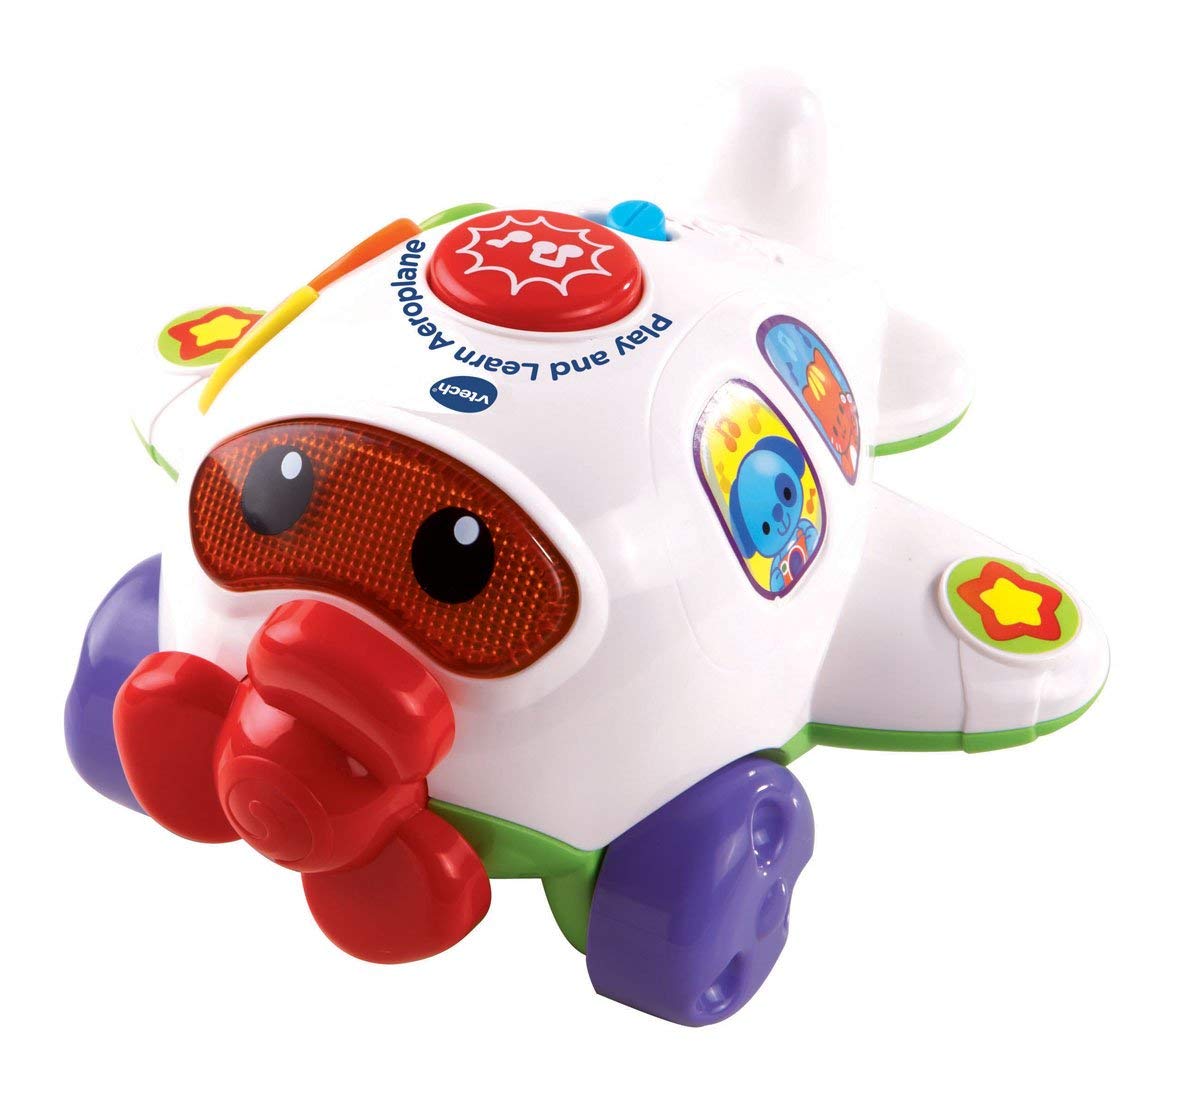 Vtech Play and Learn Aeroplane